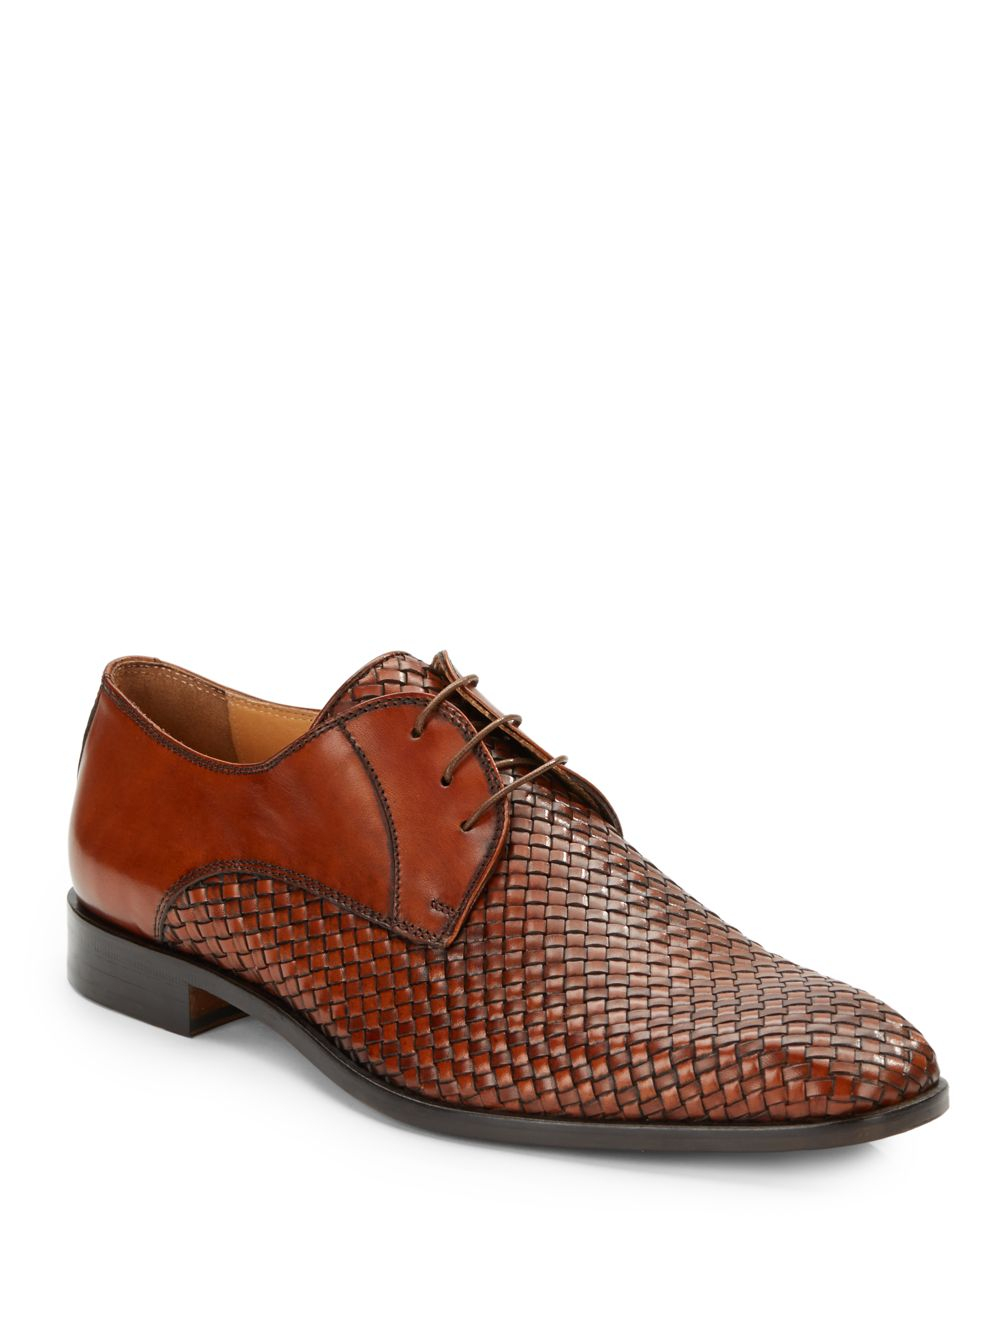 Saks Fifth Avenue Black Label Three Eye Woven Lace-Up Leather Loafers in Brown for Men | Lyst